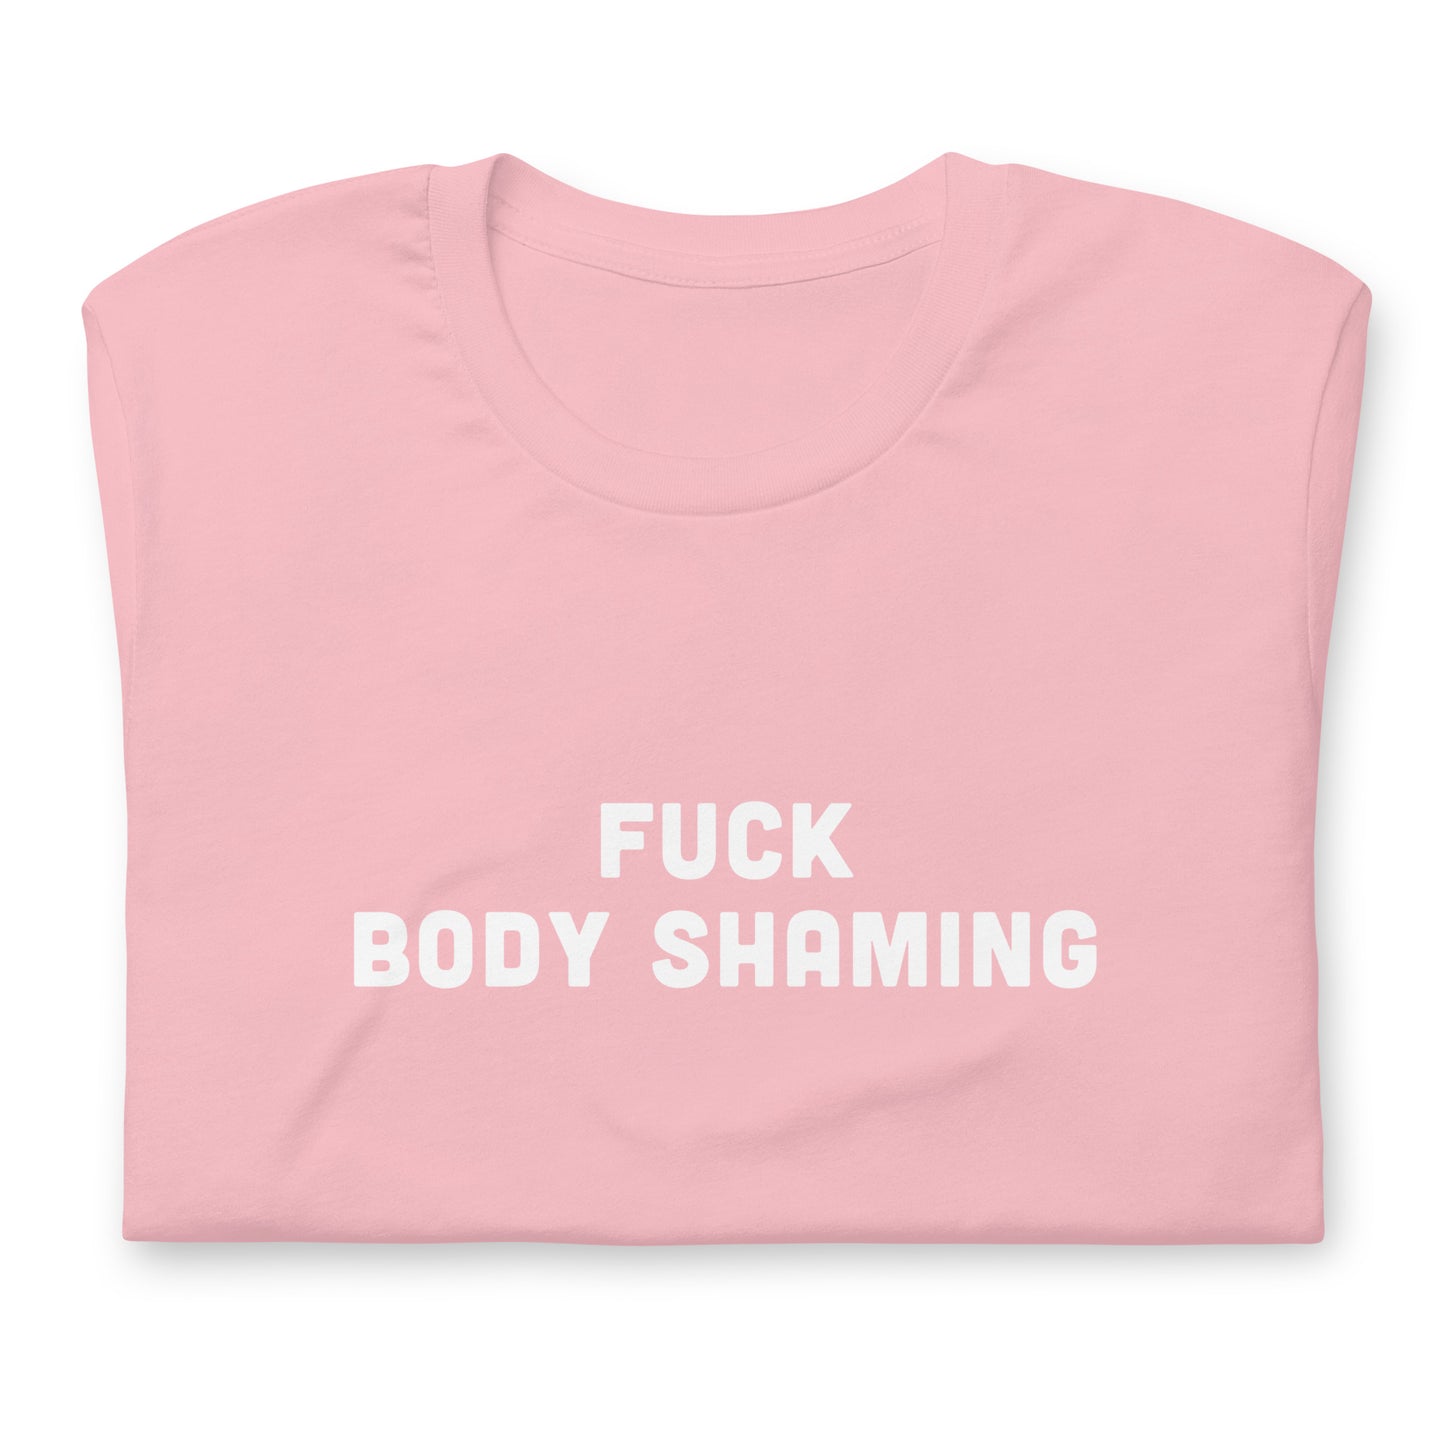 Fuck Body Shaming T-shirt Size 2XL Color Forest